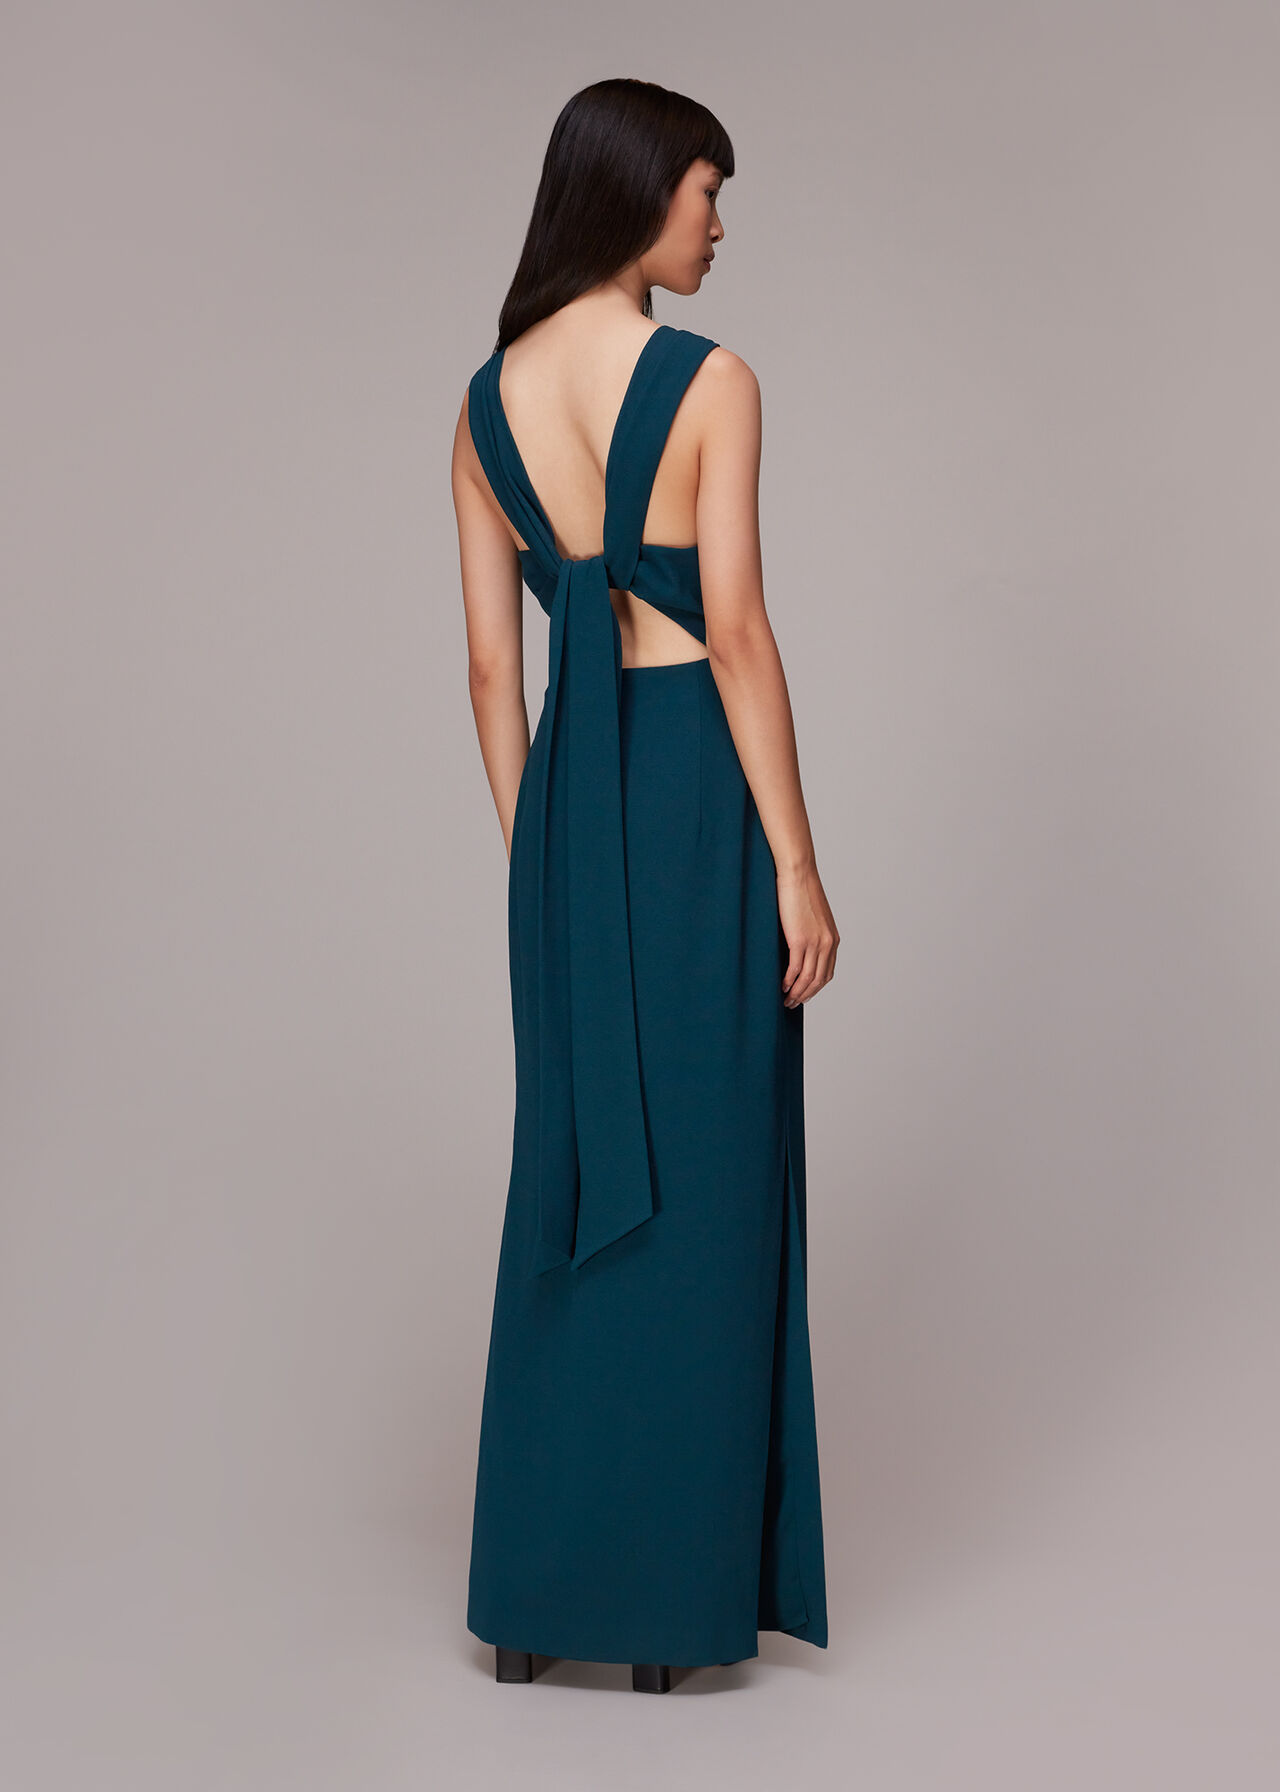 Teal Tie Back Maxi Dress | WHISTLES